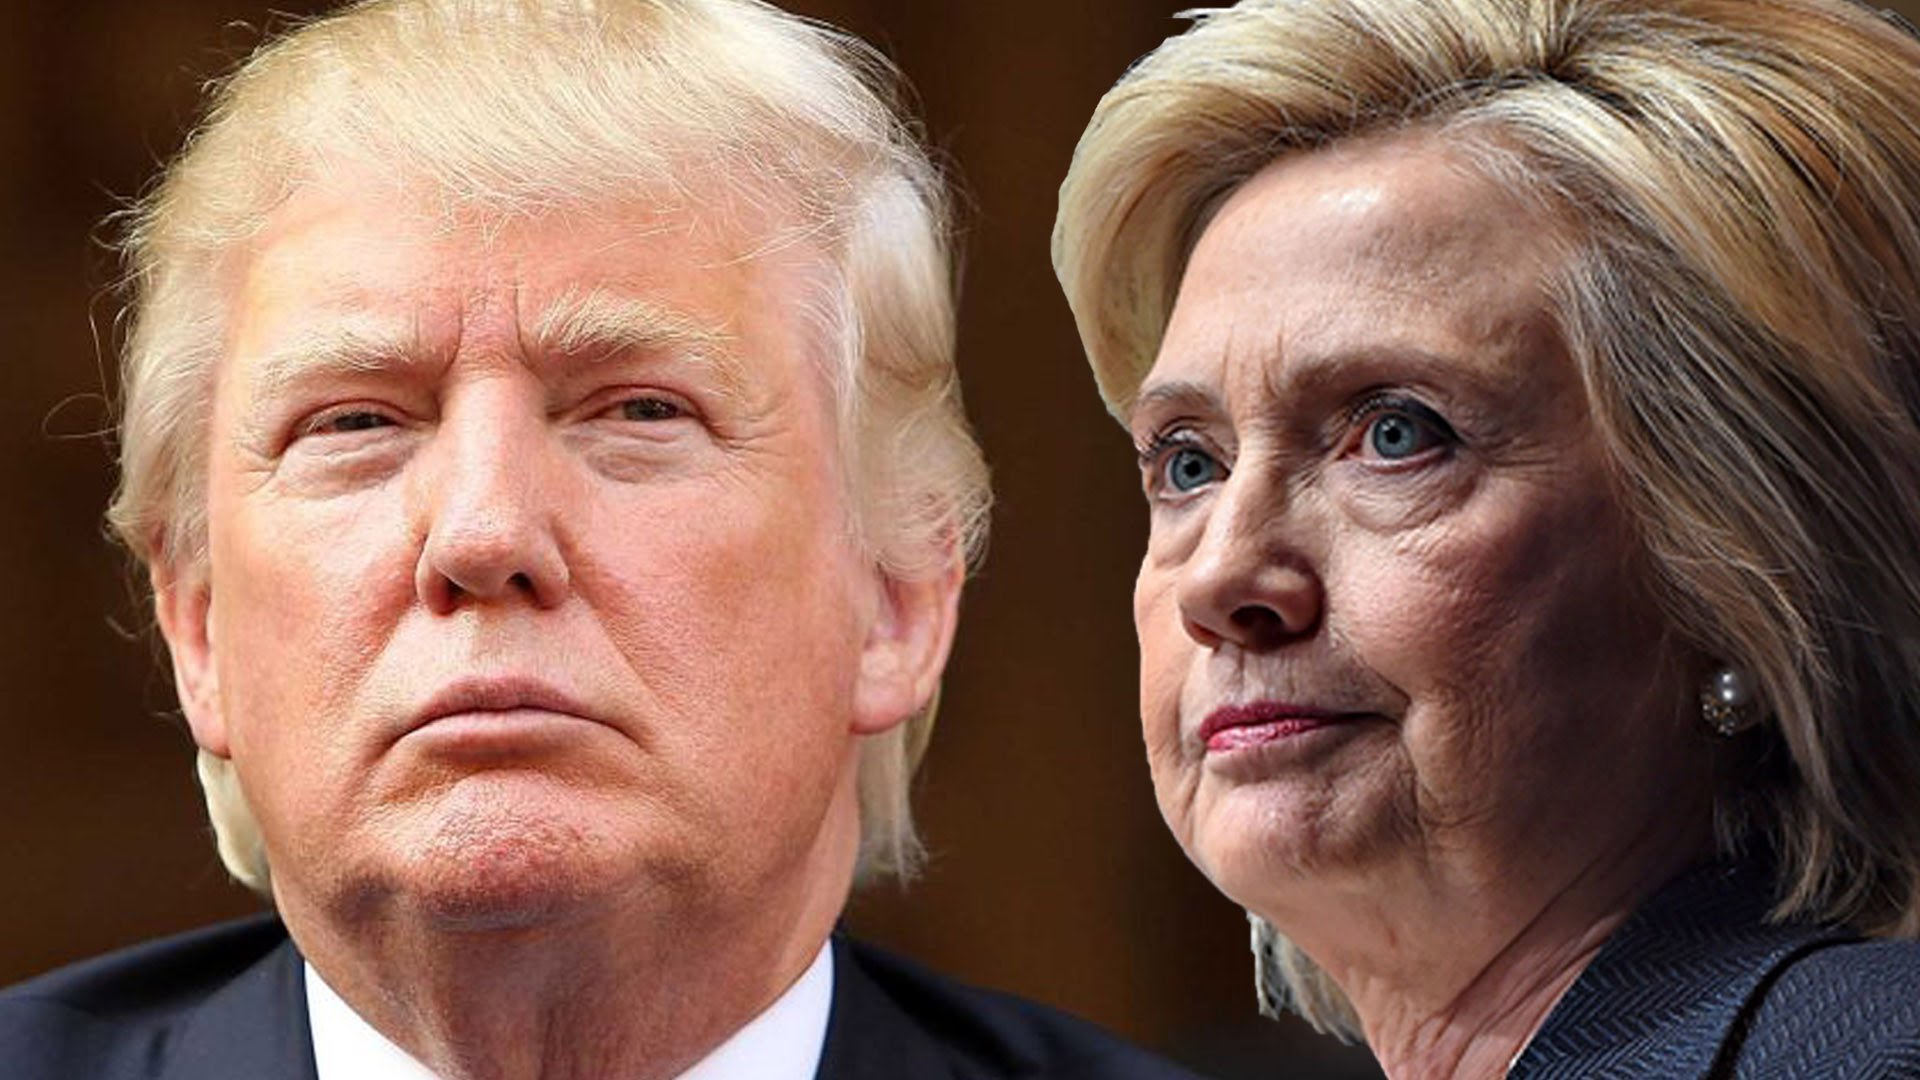 Trump issues unmistakable threat to Clinton